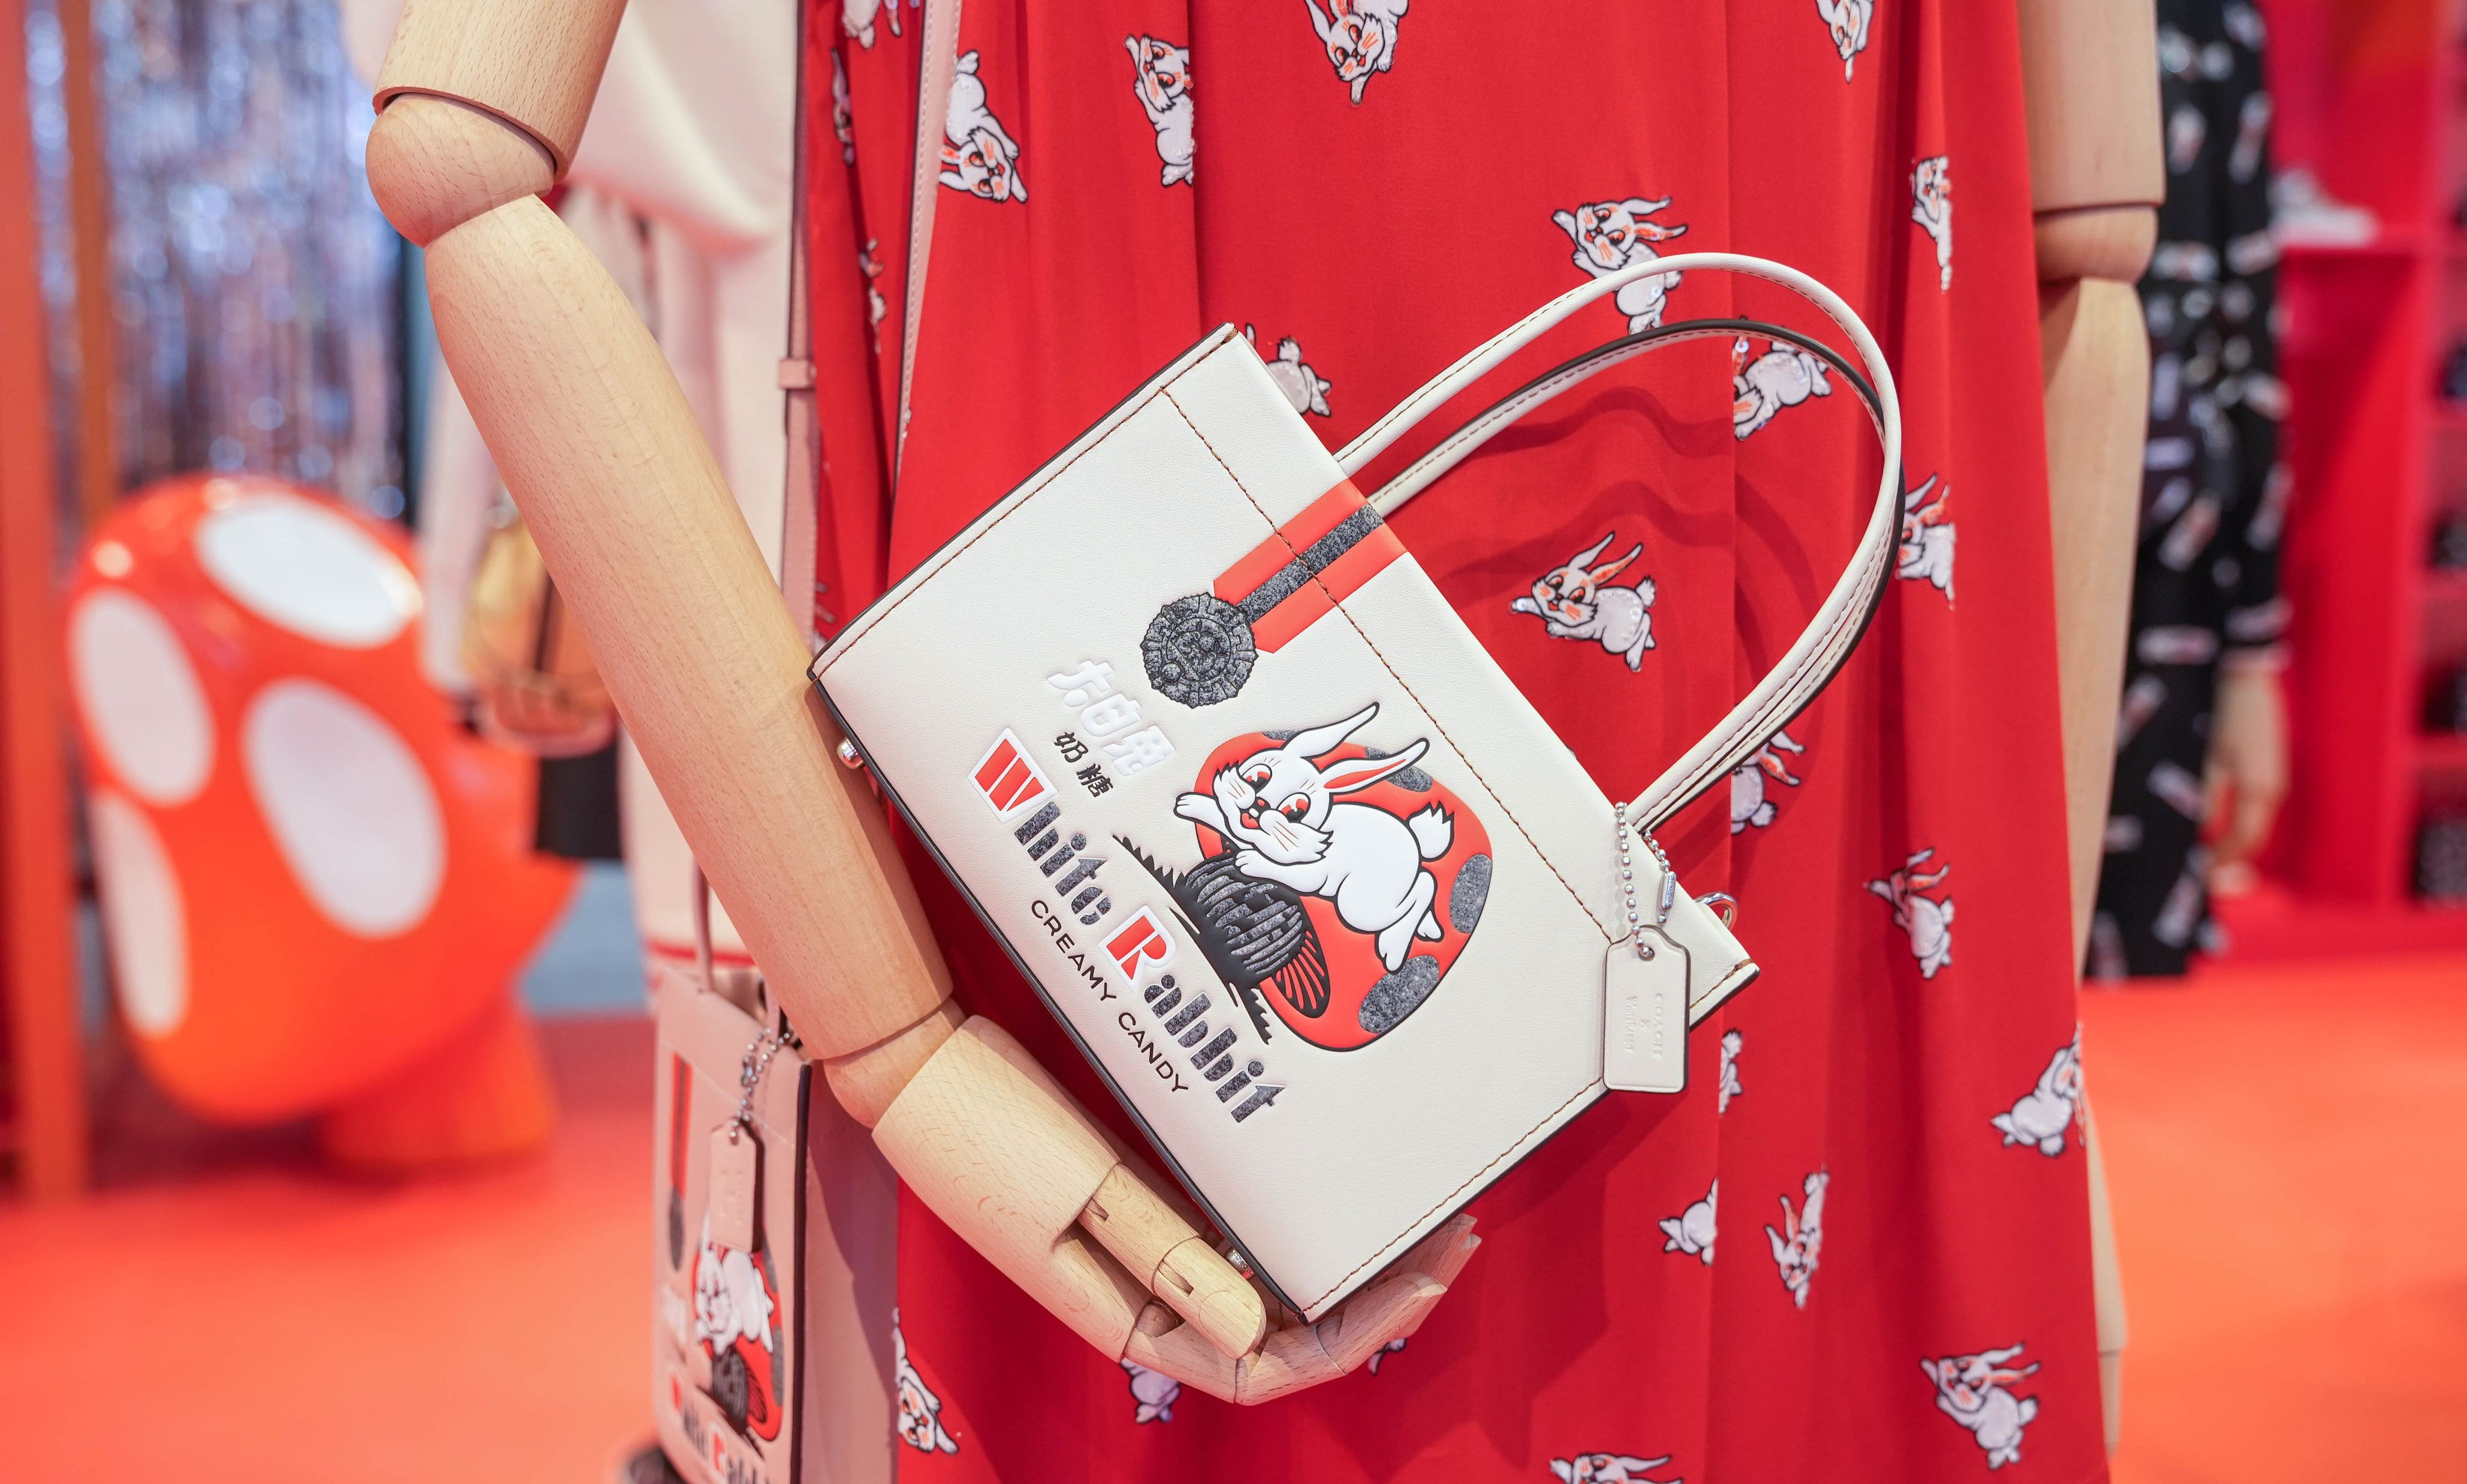 Coach has tied up the maker of White Rabbit candy to launch a range of products, including handbags. Photo: Handout